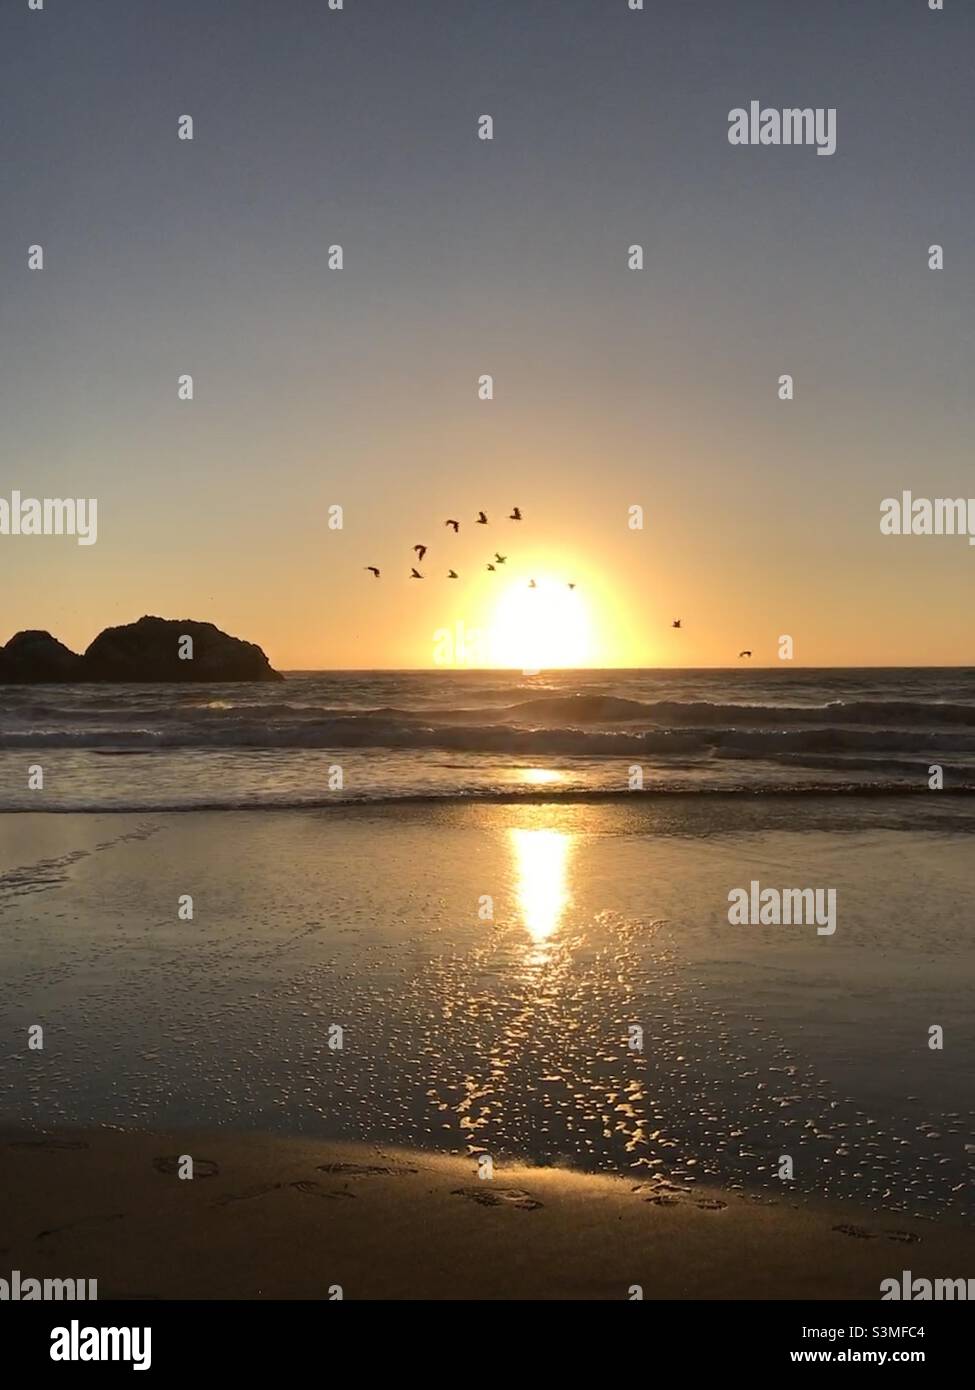 A bright Orange Sun setting over the ocean with birds flying past and a rock island in the background. Stock Photo